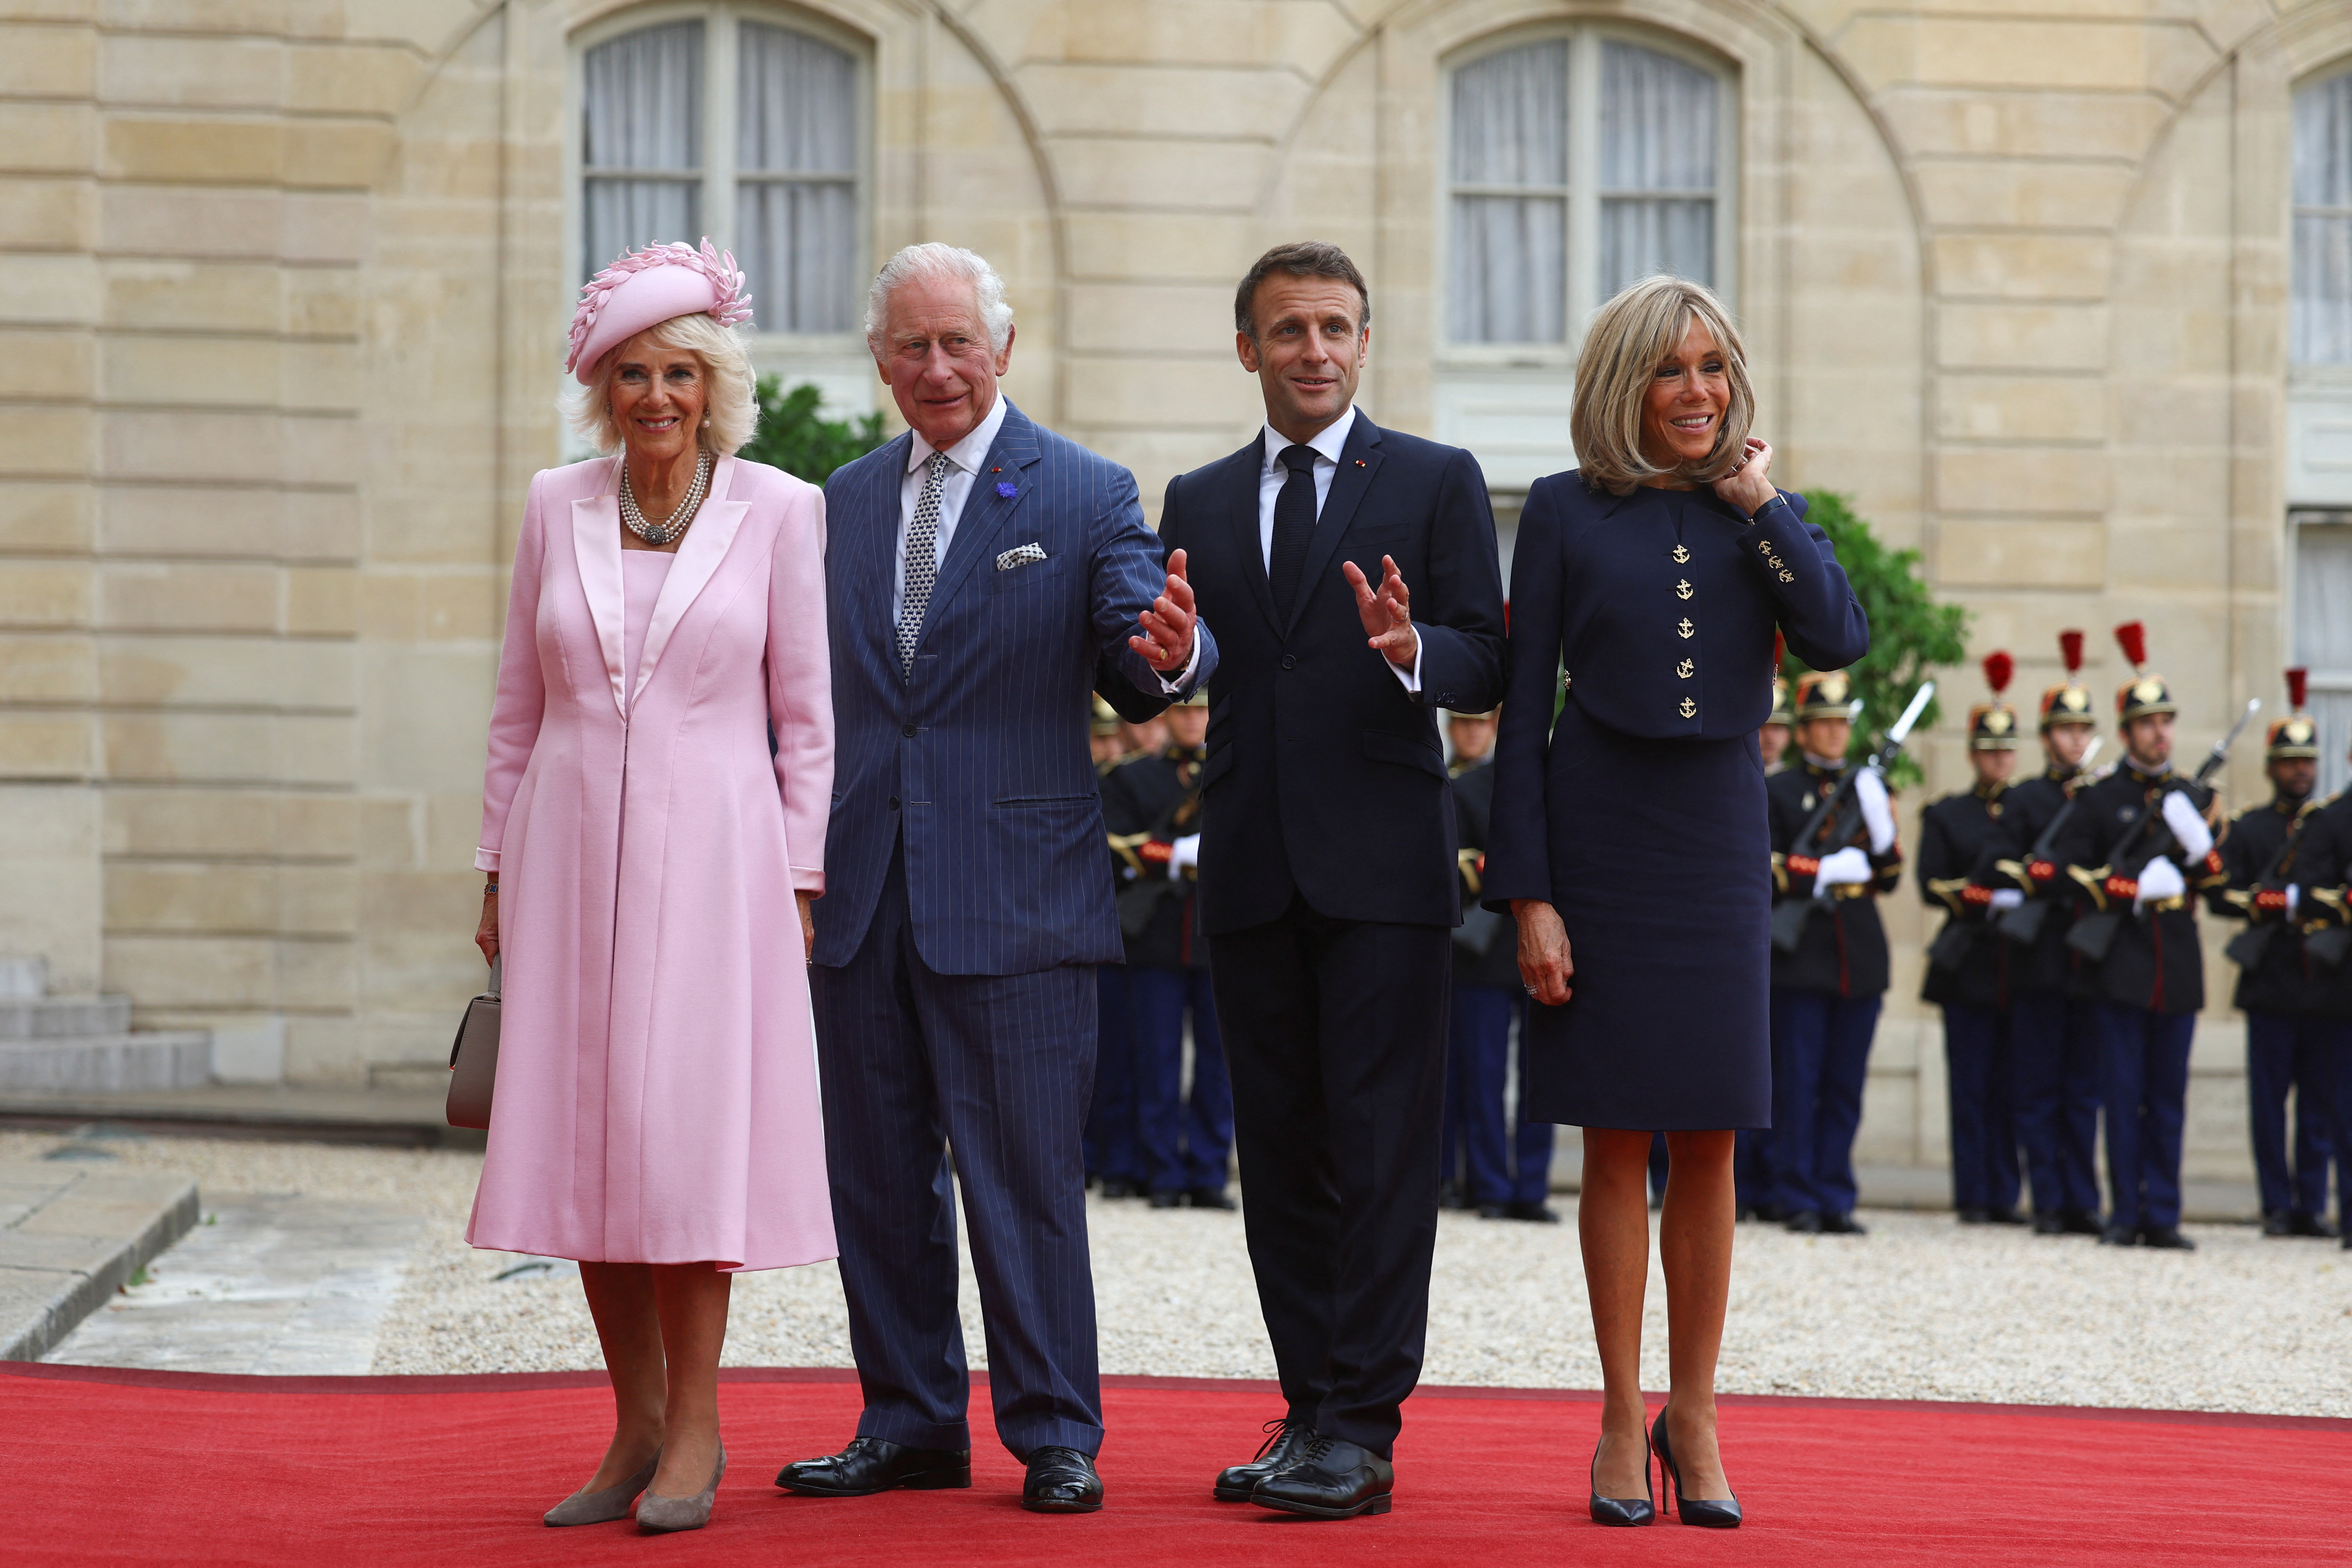 LVMH CEO Bernard Arnault and his wife arrive at the Elysee Palace